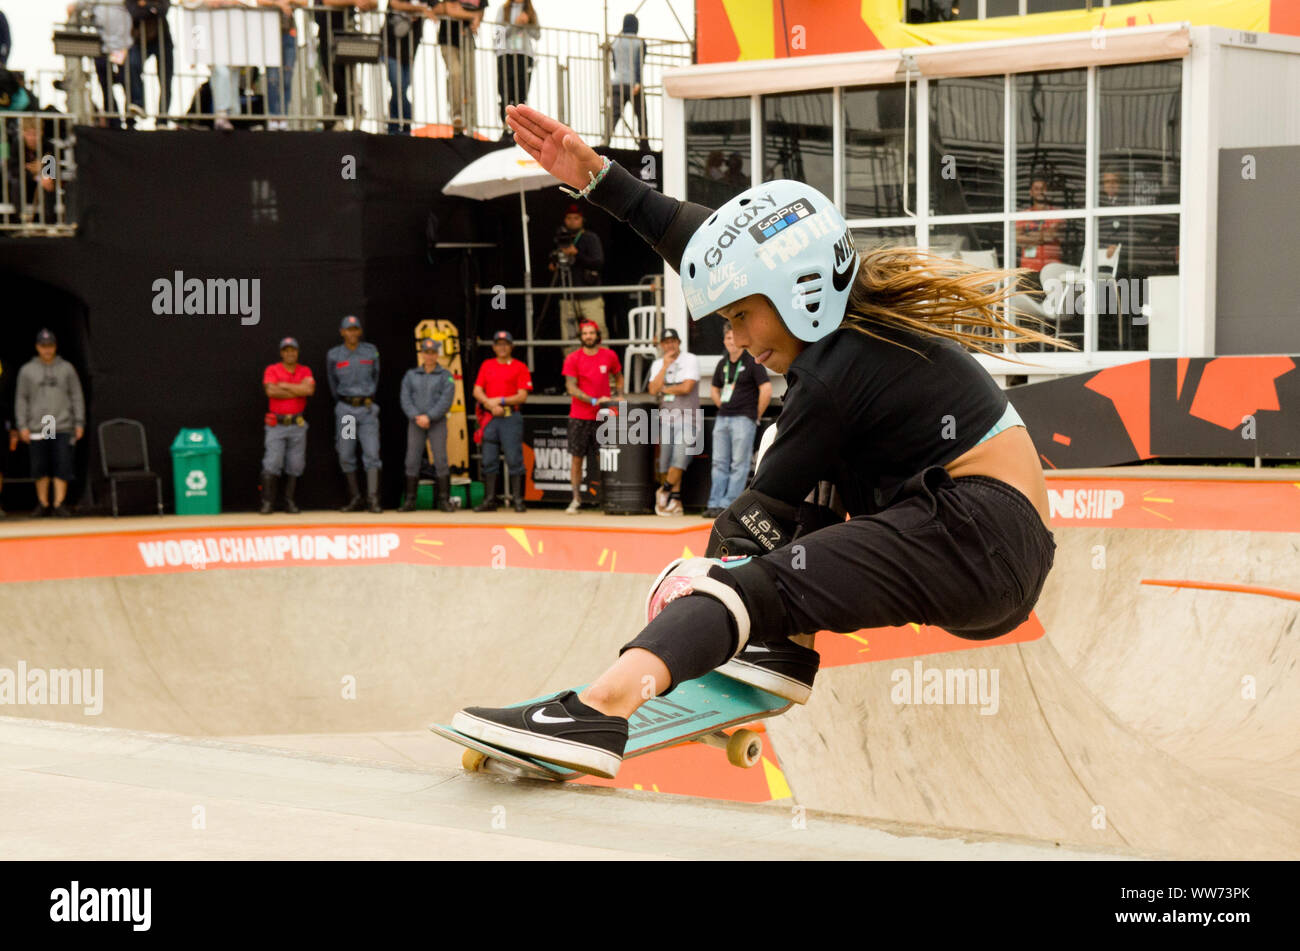 SÃO PAULO, SP - 13.09.2019: CAMPEONATO MUNDIAL DE SKATE PARK SP - The WS  Park Skateboarding World Championship ends the calendar of the first  qualifying window. This is the event that adds